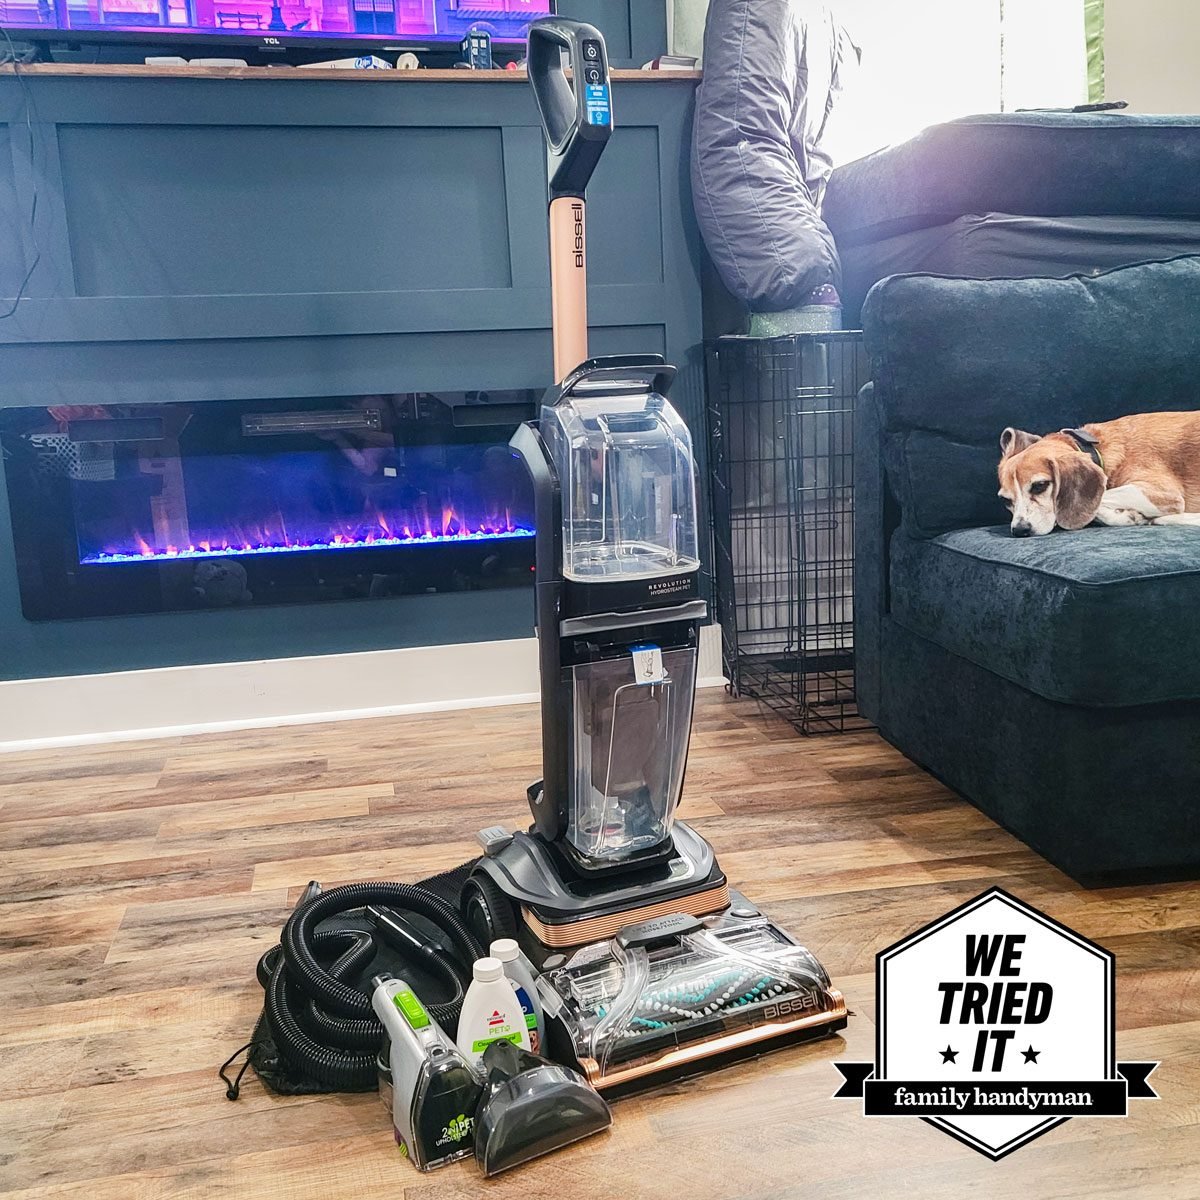 BISSELL Revolution HydroSteam Pet Carpet Cleaner REVIEW - A GAME CHANGER! 